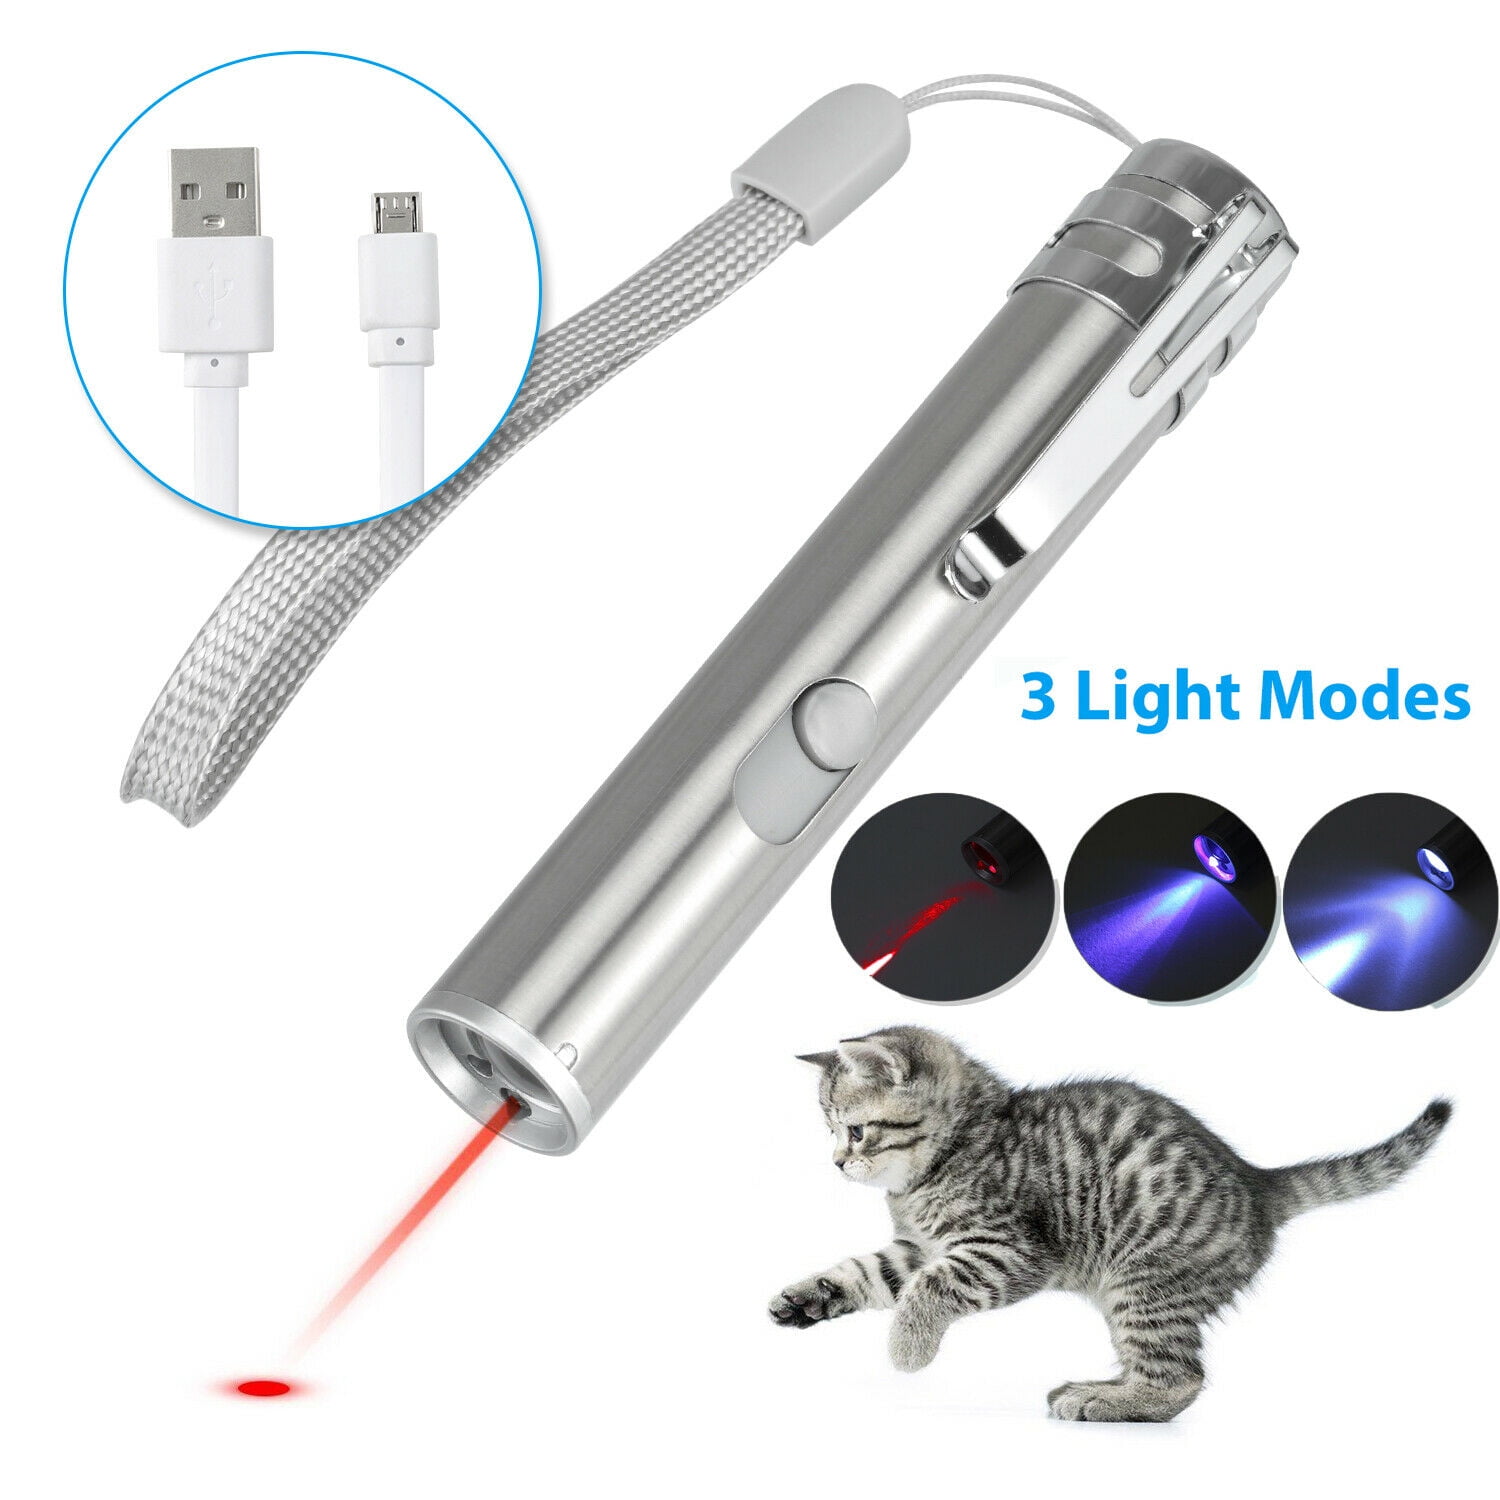 10PCS 900Miles 650nm Red Laser Pointer Pen Visible Beam Light AAA Lazer Lamp US 